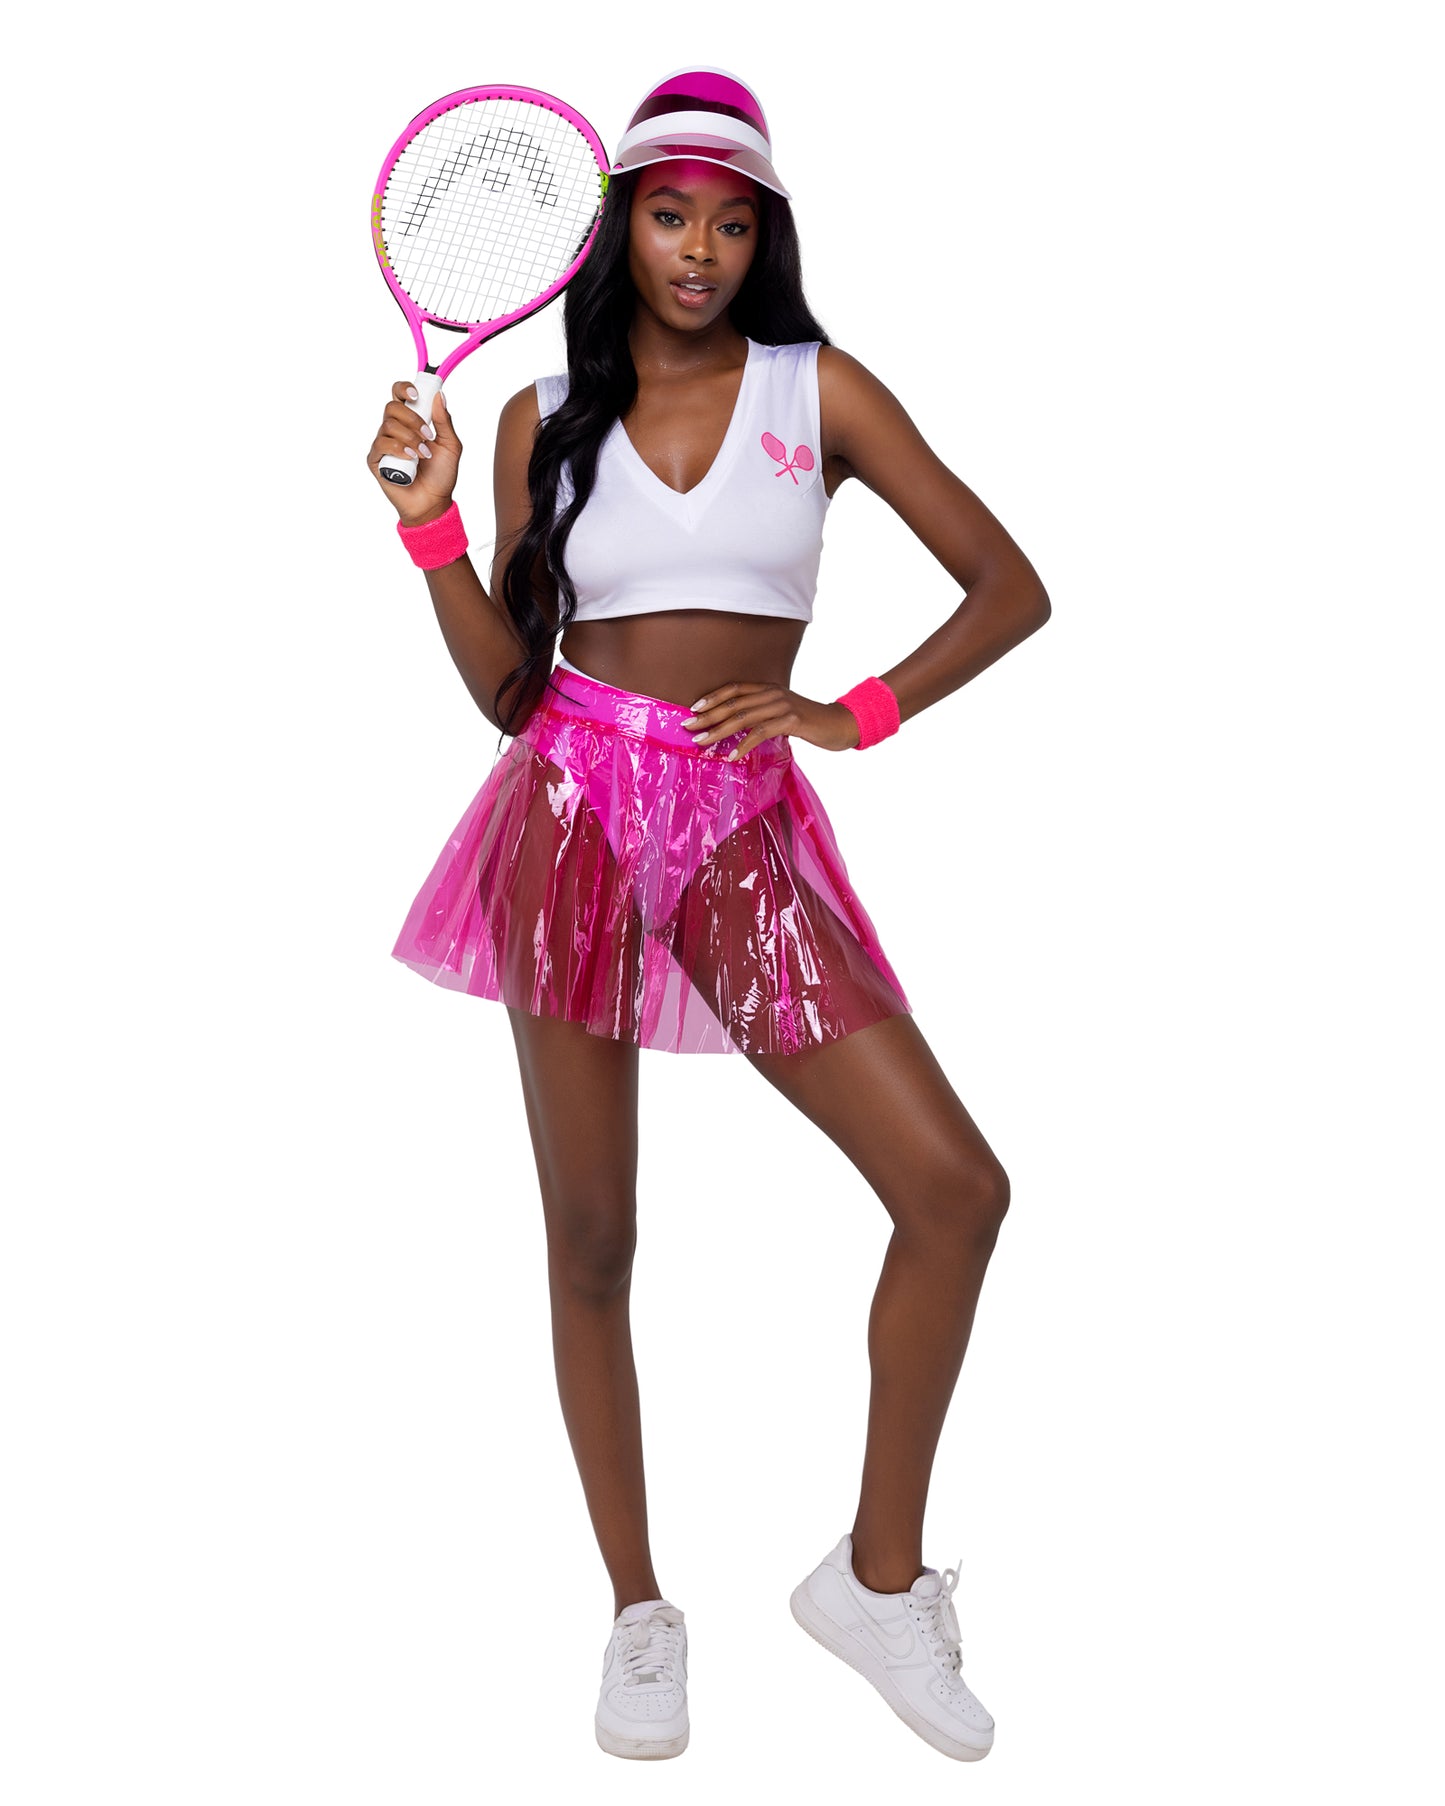 Wimbledon Barbie Costume by ROMA in Size S, M, or L